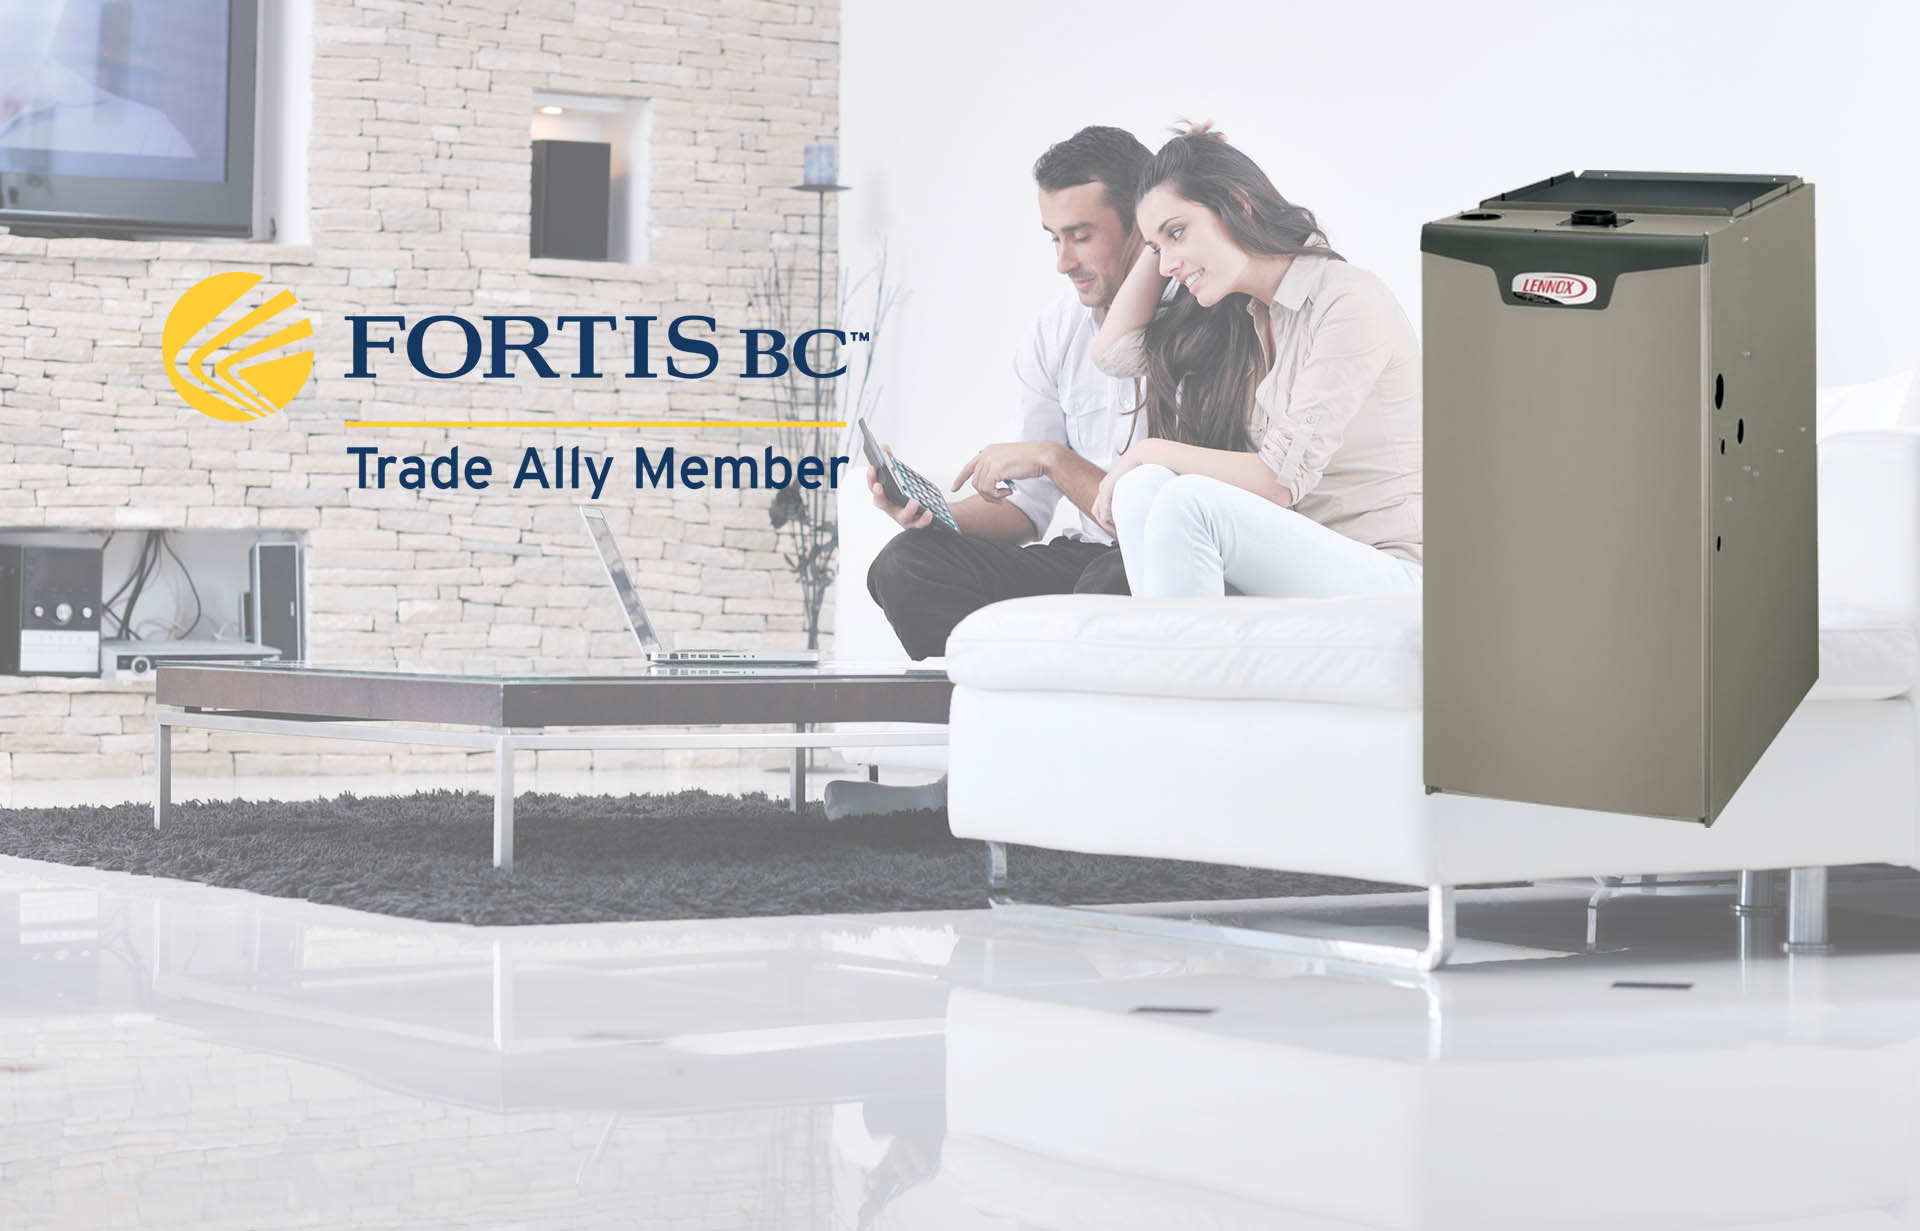 fortis-rebates-for-furnaces-2020-tek-climate-heating-and-air-conditioning